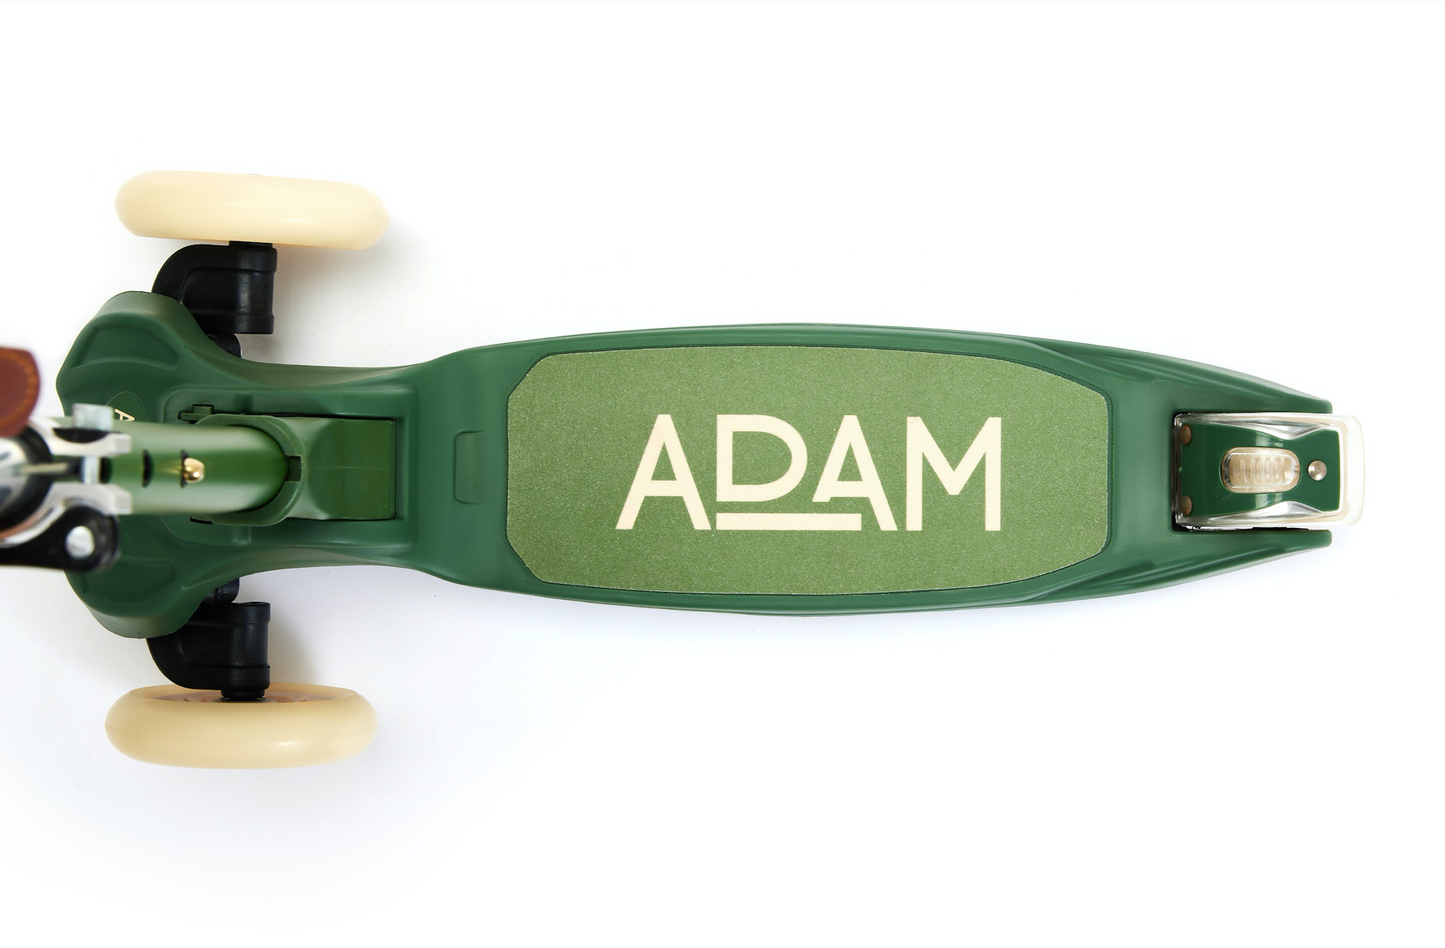 The Adam Scooter